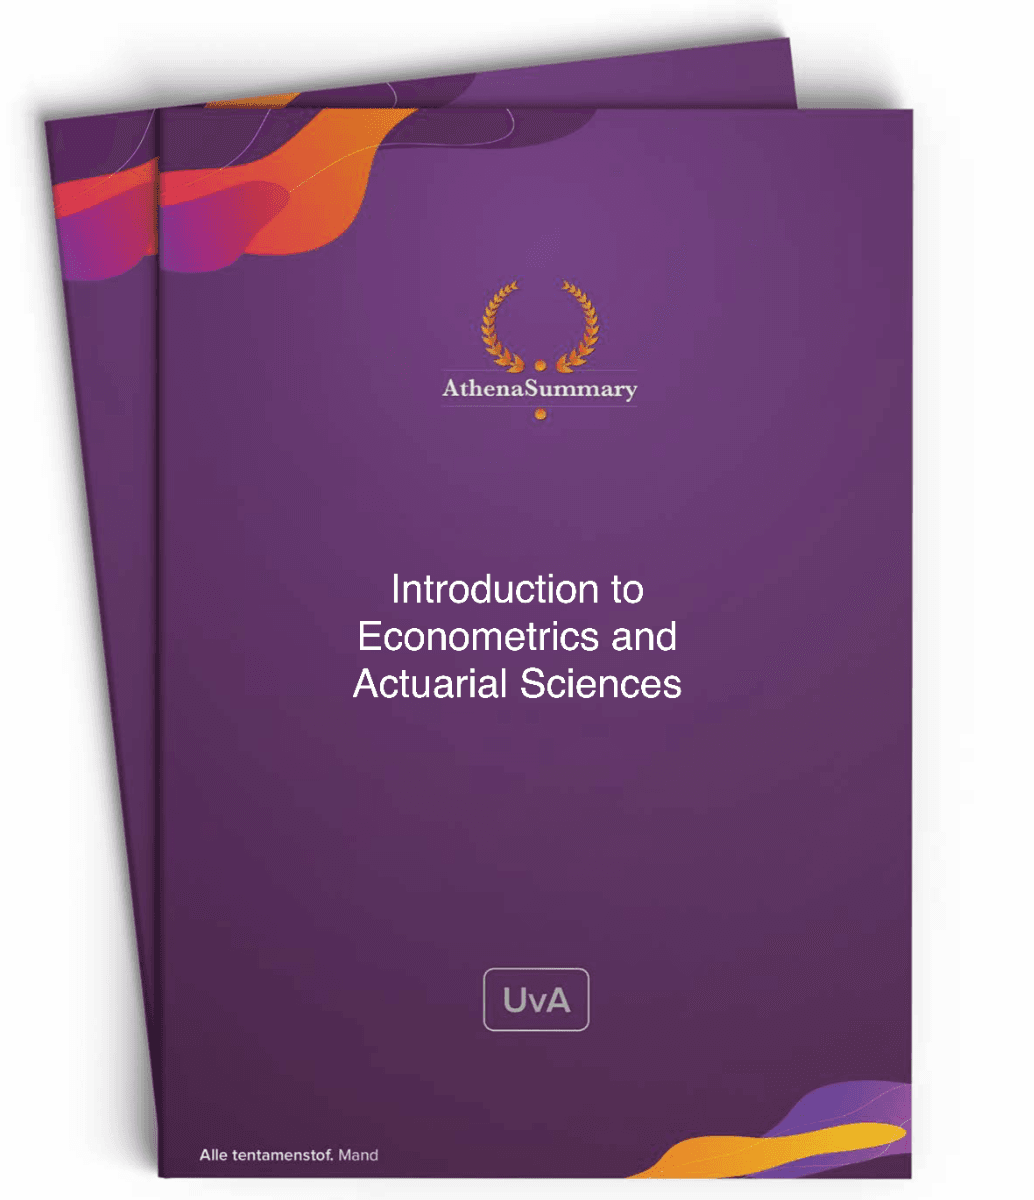 Literature Summary: Introduction to Econometrics and Actuarial Sciences